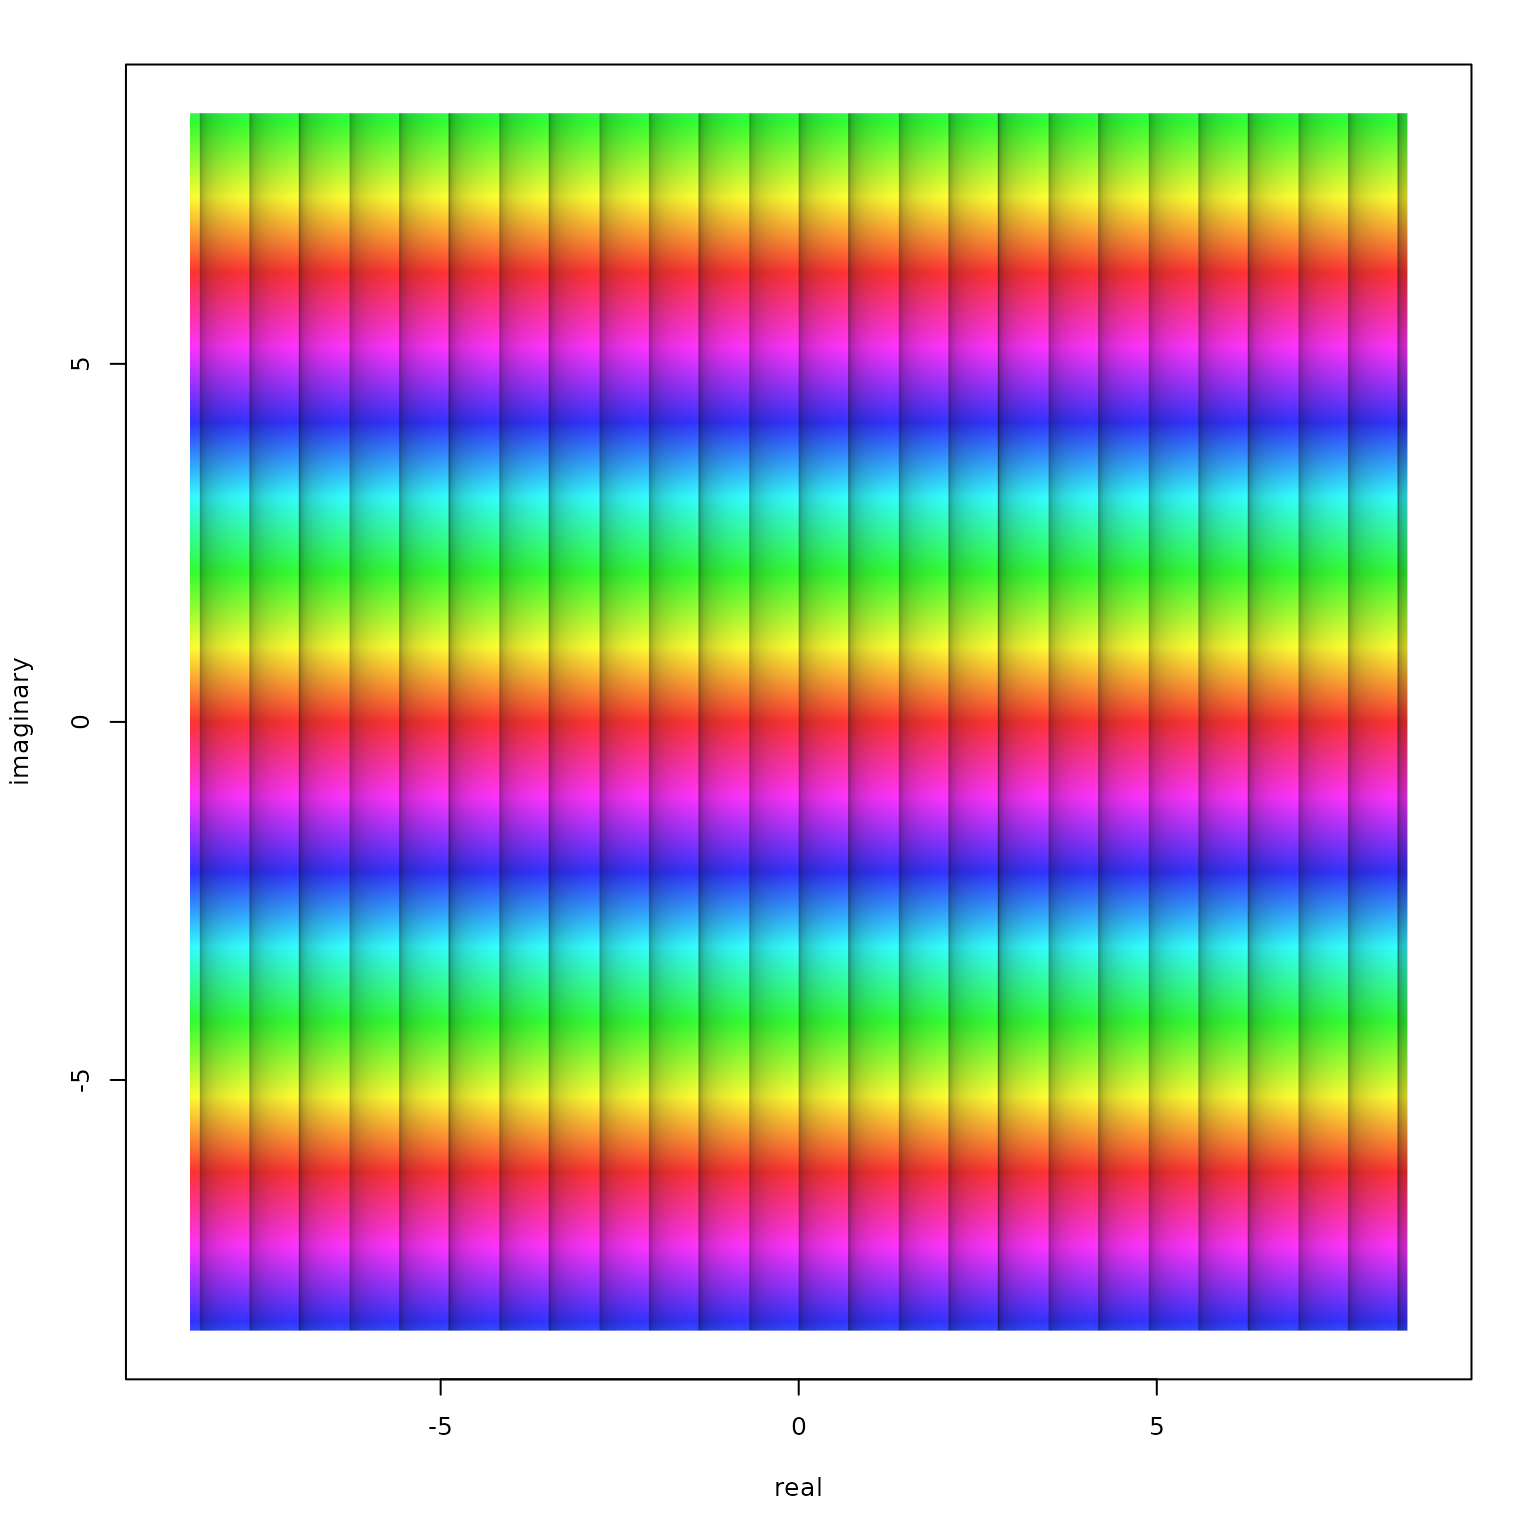 Phase portrait of the function $f(z)=\mathrm{e}^z$ in the window $\left|\Re(z)\right| < 8.5$ and $\left|\Im(z)\right| < 8.5$ with iso-modulus lines.